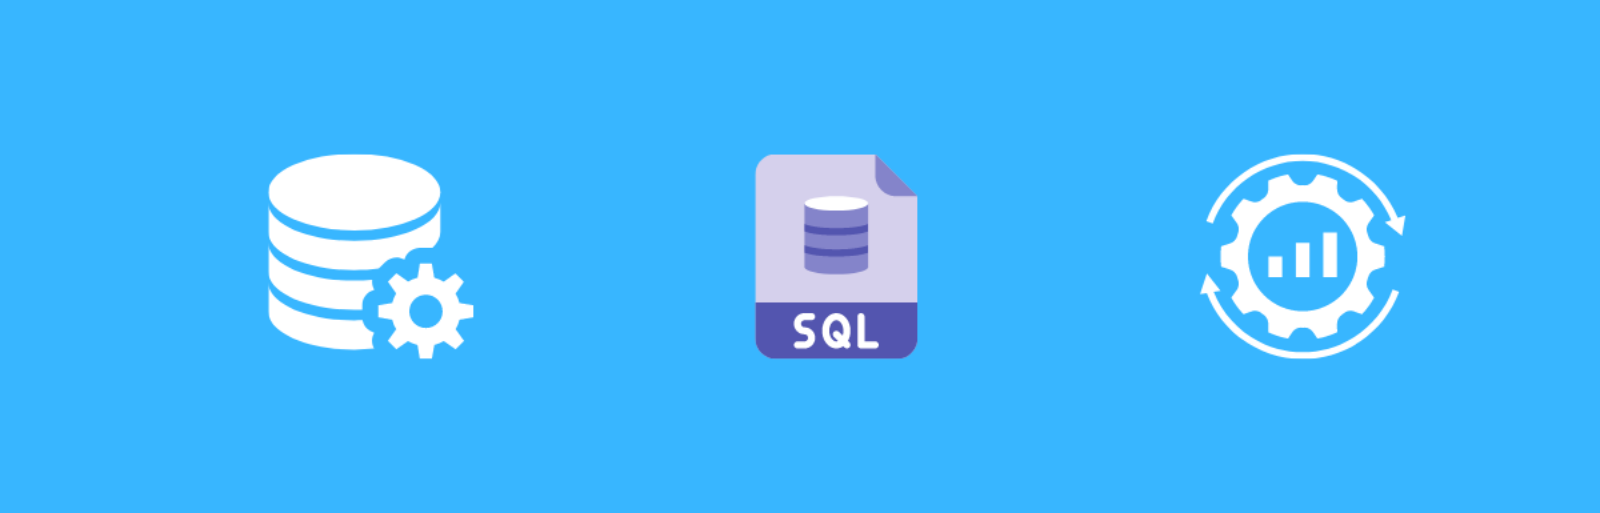 SQL Query Optimization Is Easy With These 7 Tools for DBA and Developer